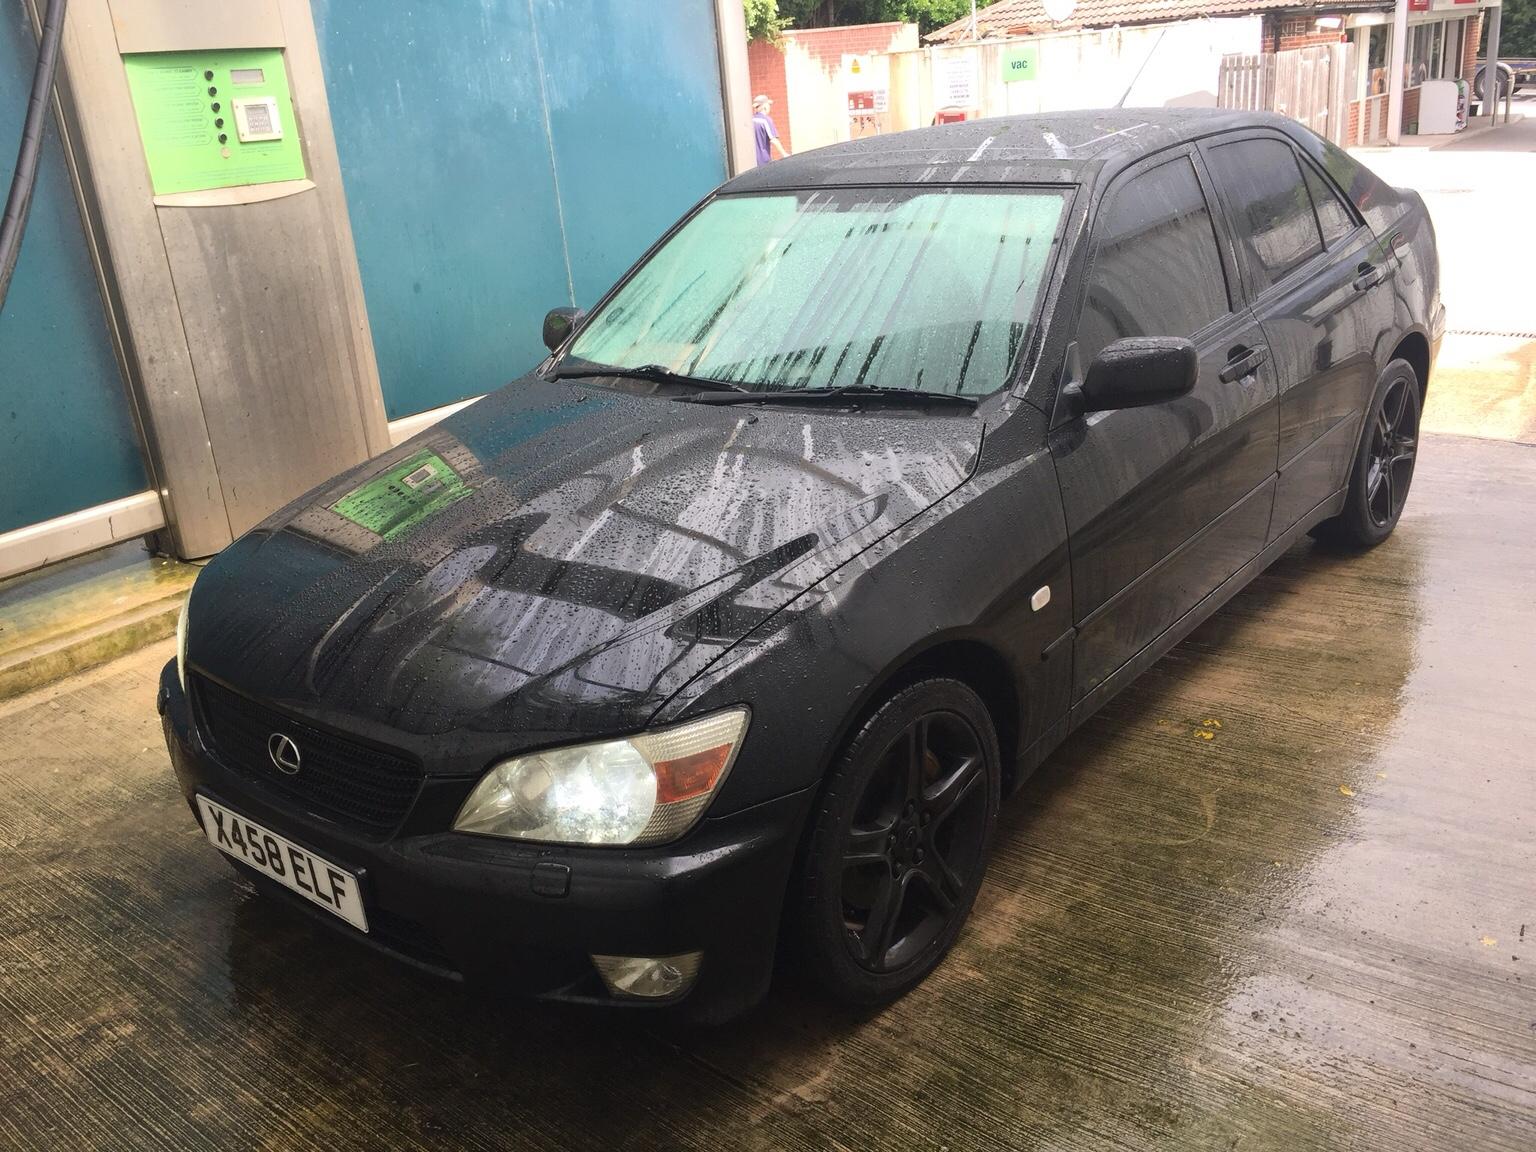 Lexus IS200 Black in Rotherham for £650.00 for sale Shpock